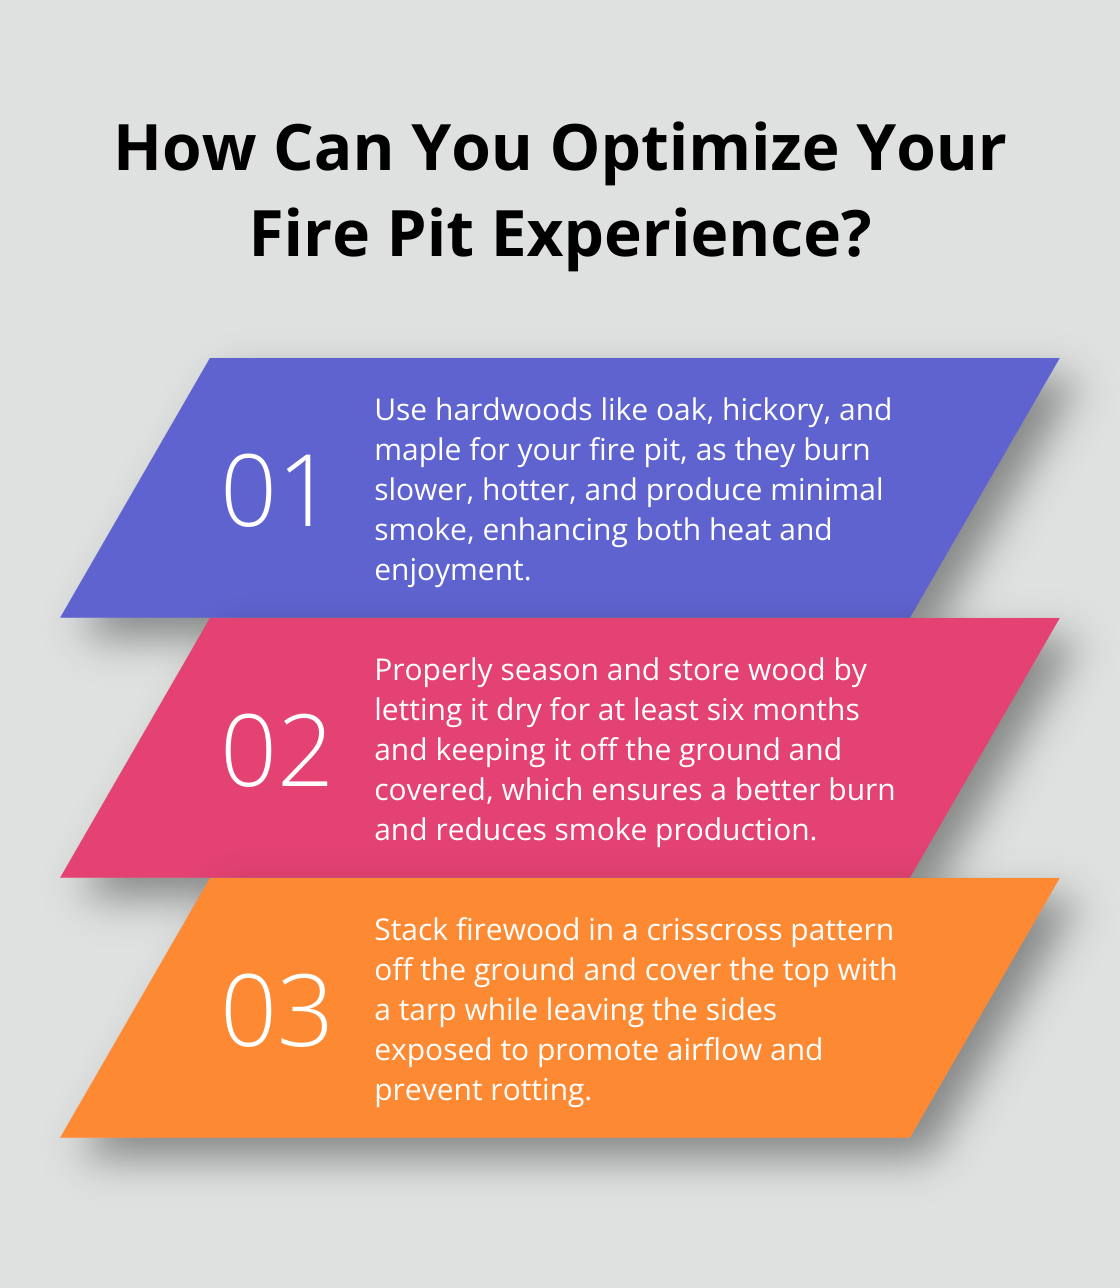 Fact - How Can You Optimize Your Fire Pit Experience?